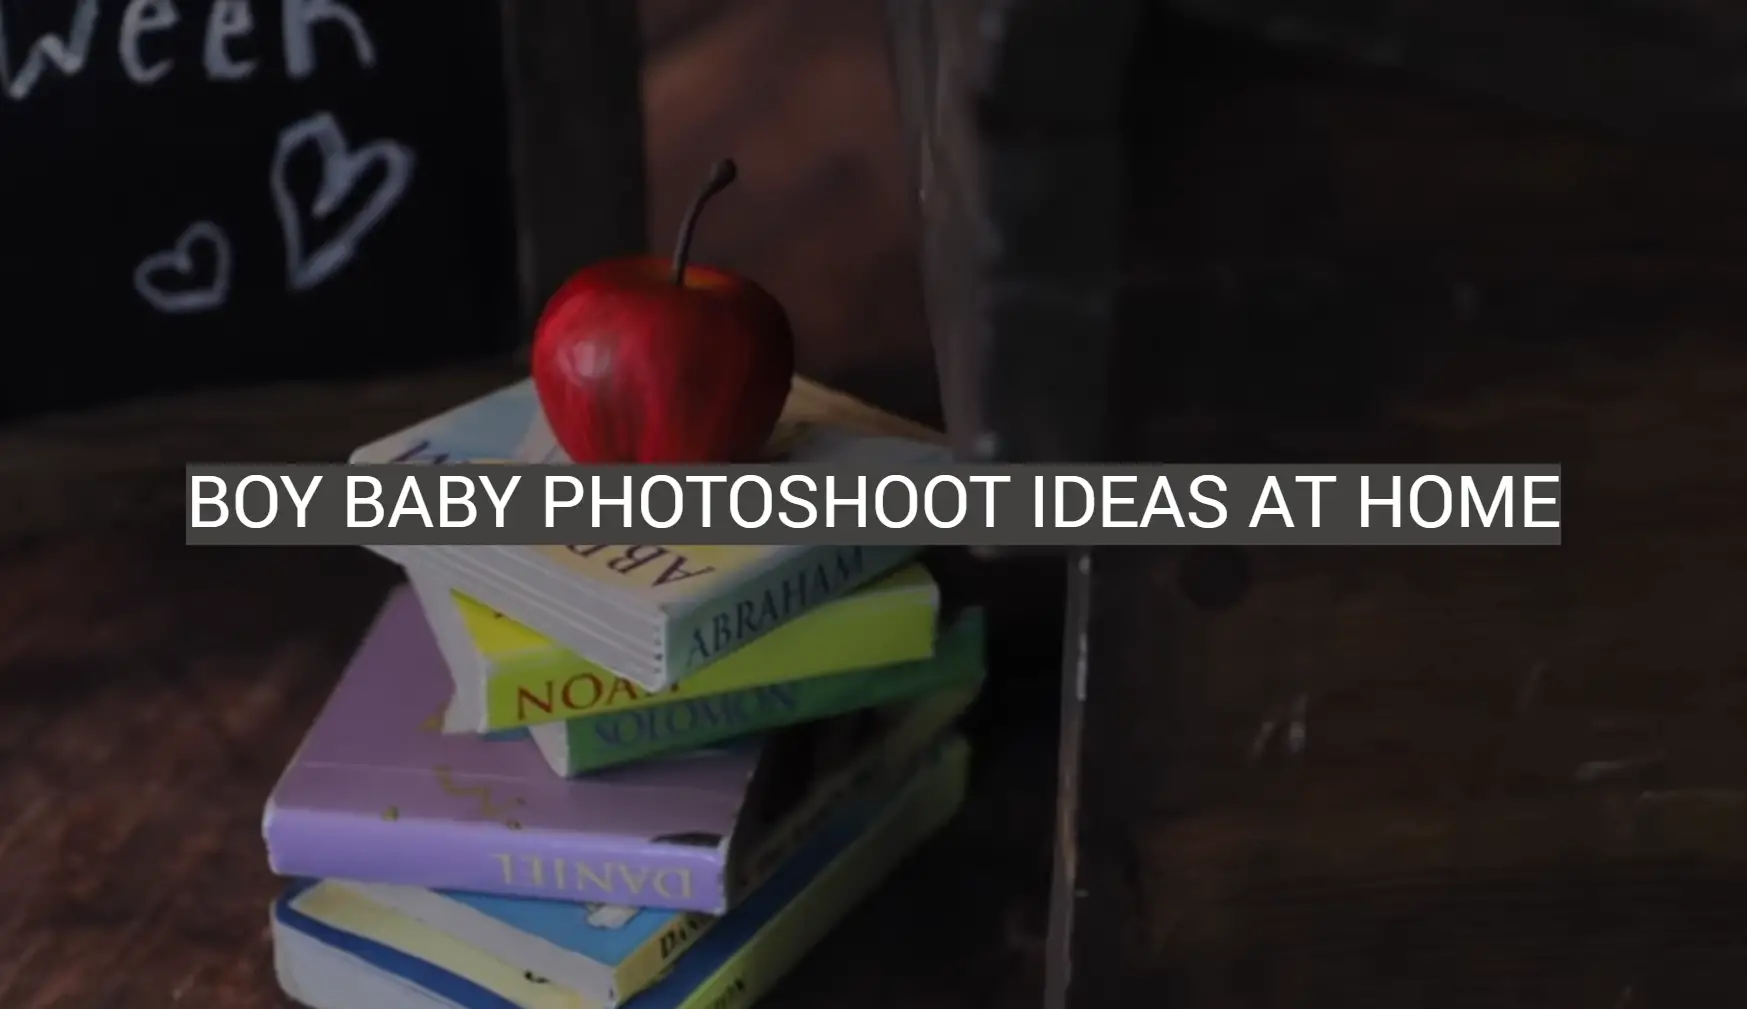 Boy Baby Photoshoot Ideas at Home